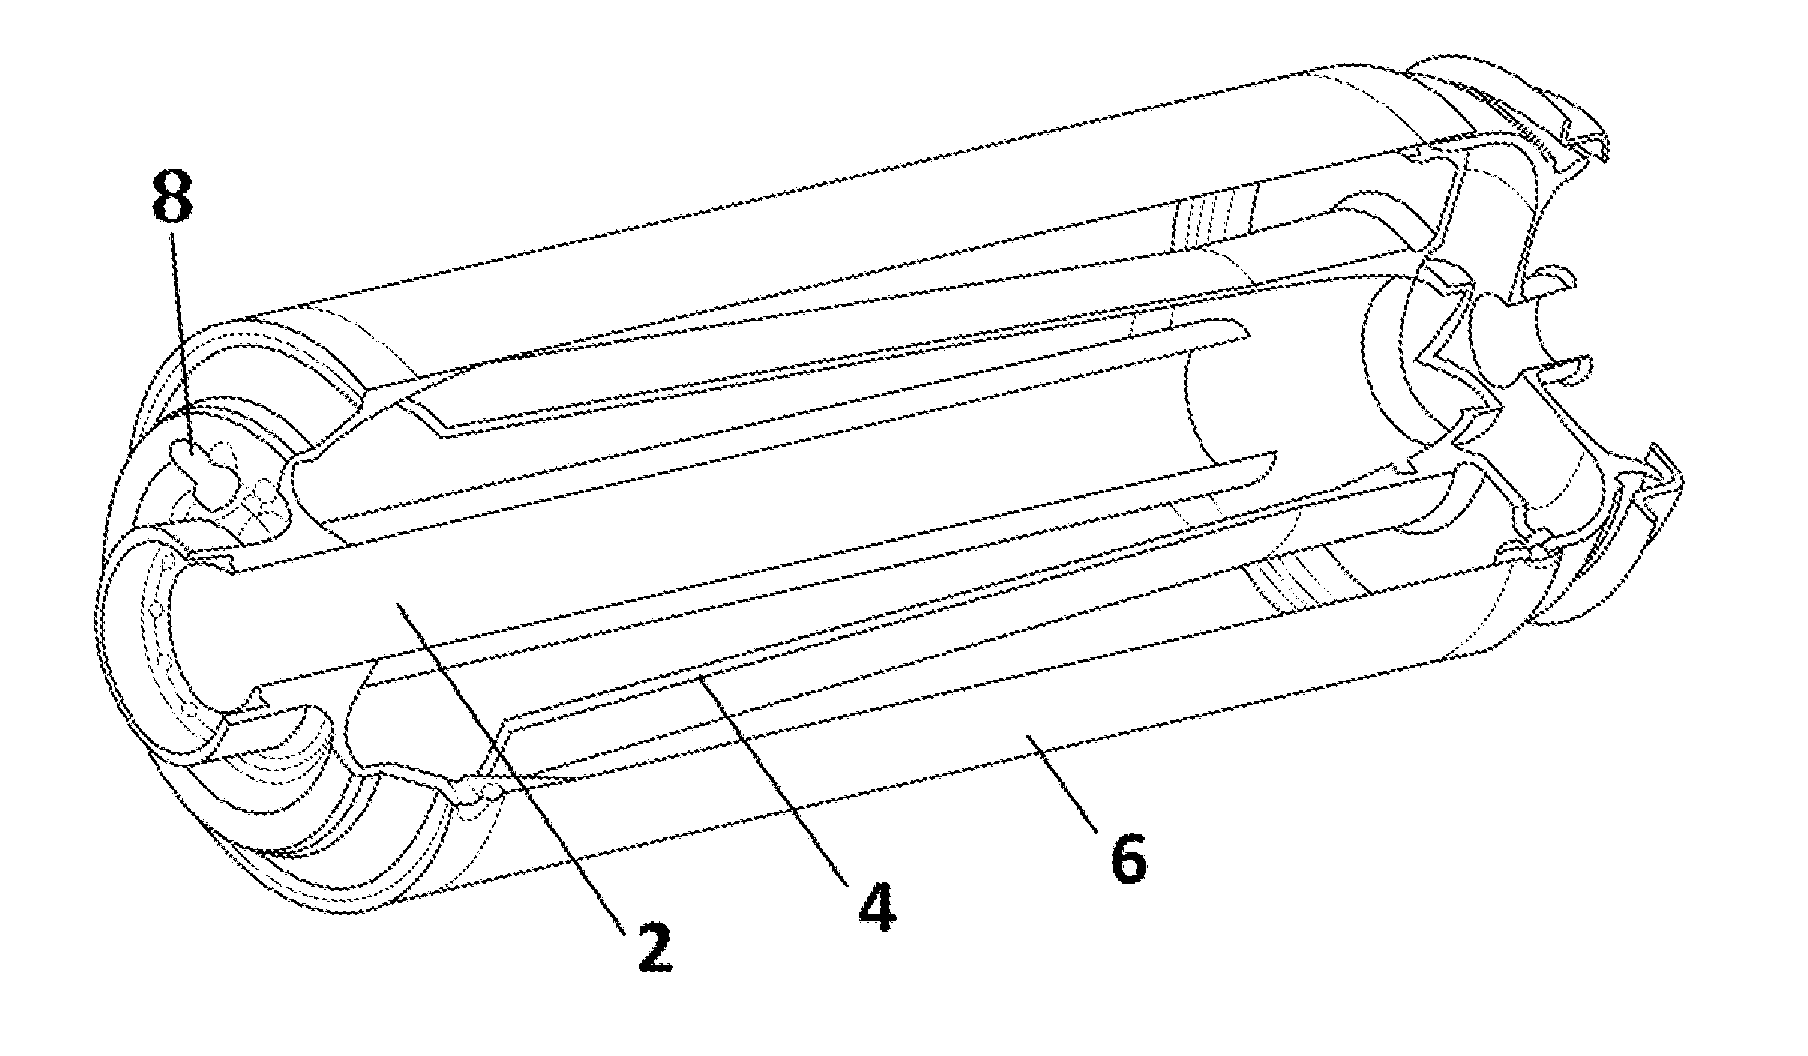 Exhaust resonator for a two-stroke engine for use in a motorized float